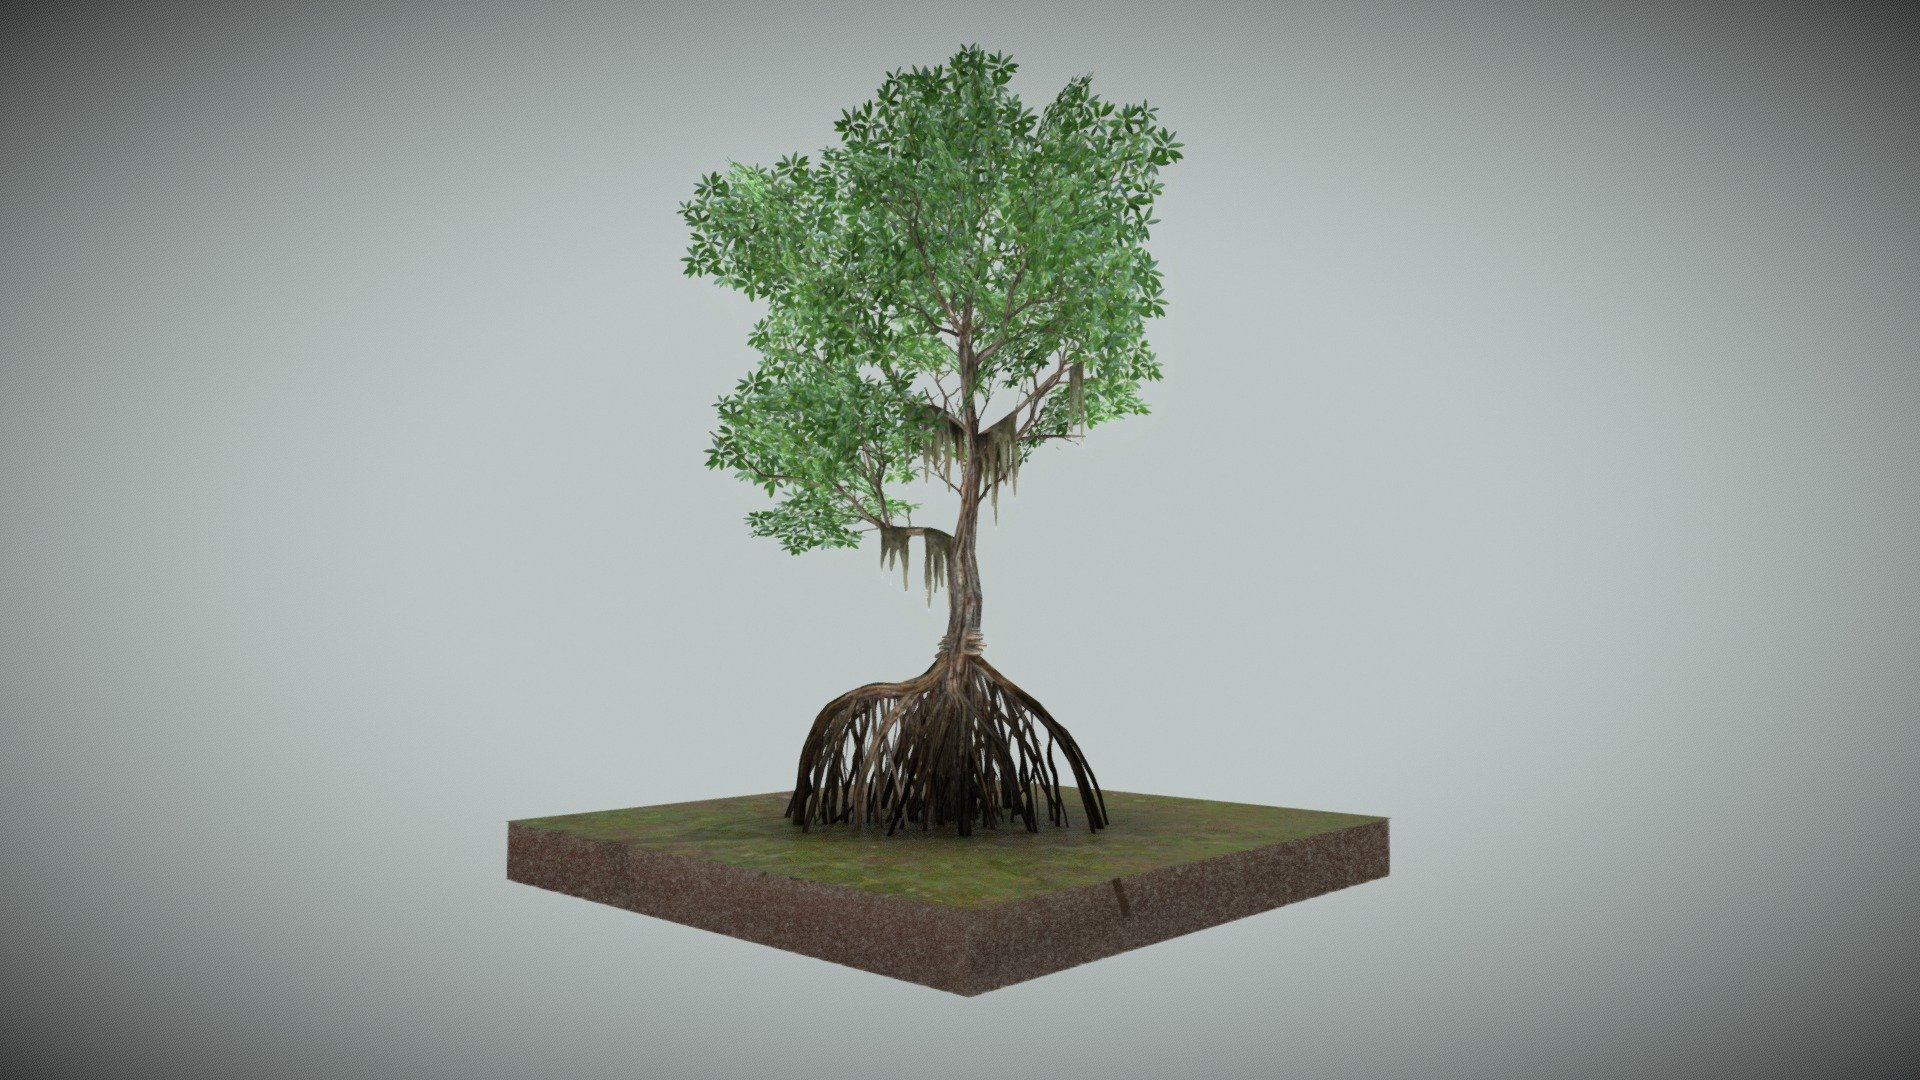 Red Mangrove - Rhizophora mangle

Hand-modelled low-poly tree made for gaming. 

As member of the rhizophoraceae family mangrove trees grow in tropical &amp; coastal swamp ecosystems. Typically on aerial prop roots, which arch above the water level, giving stands of this tree the characteristic &ldquo;mangrove